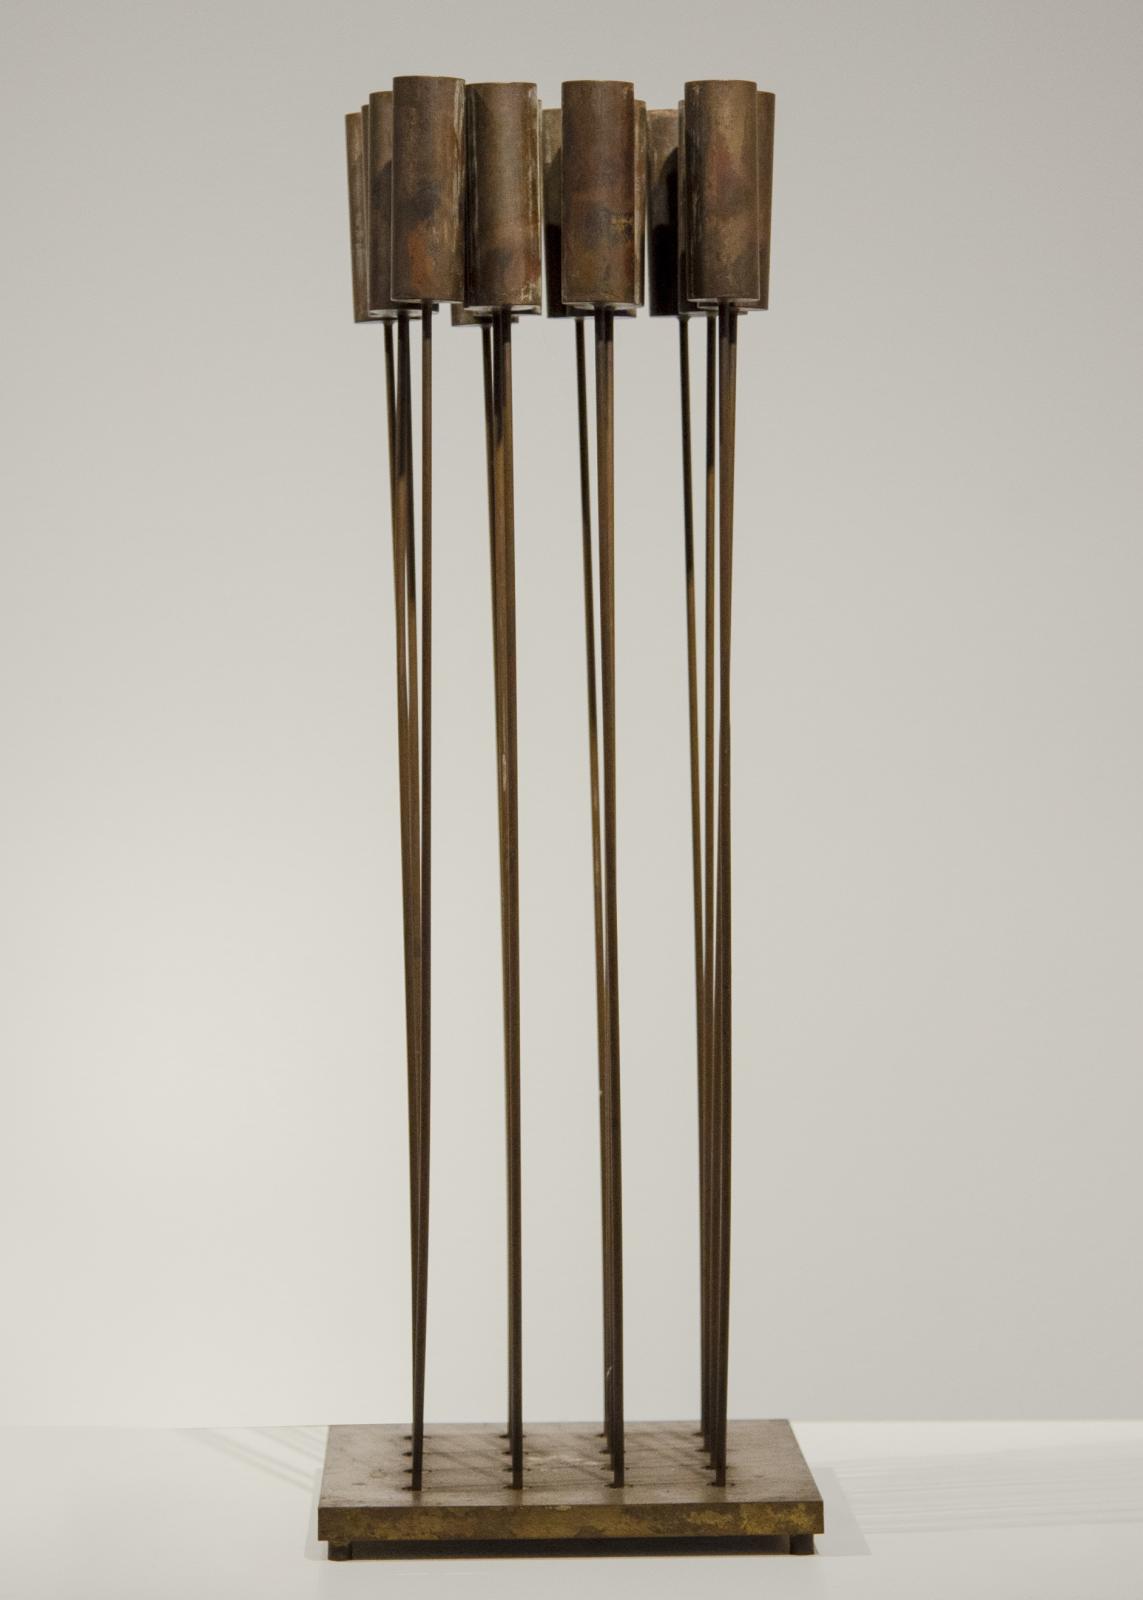 Harry Bertoia, Sonambient with Heavy Cattails, c. 1970